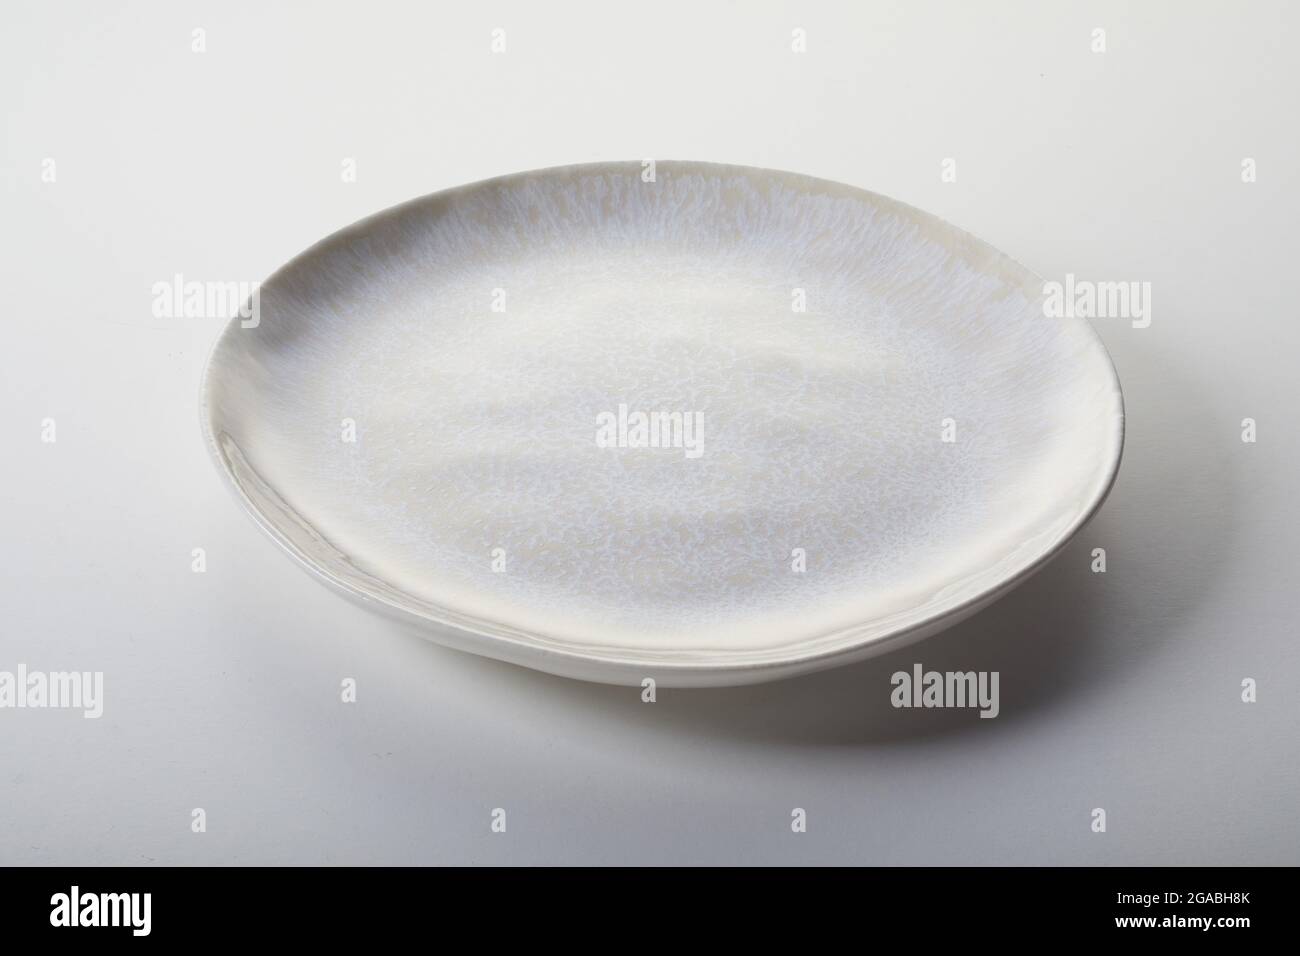 High angle of round clean plate covered with uneven stained enamel and placed on gray table Stock Photo